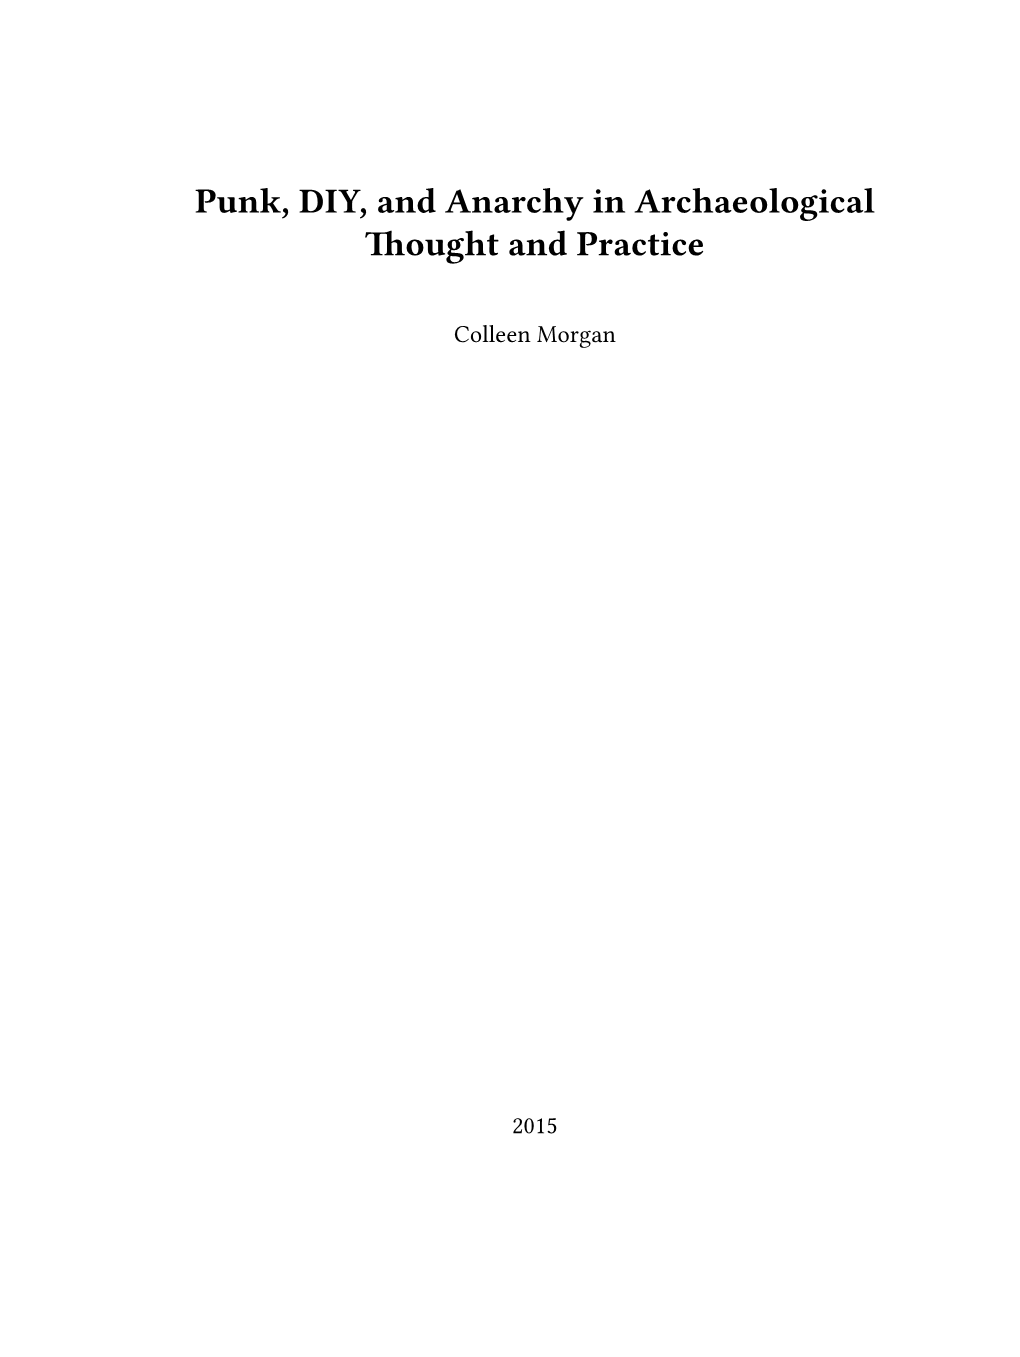 Punk, DIY, and Anarchy in Archaeological Thought and Practice